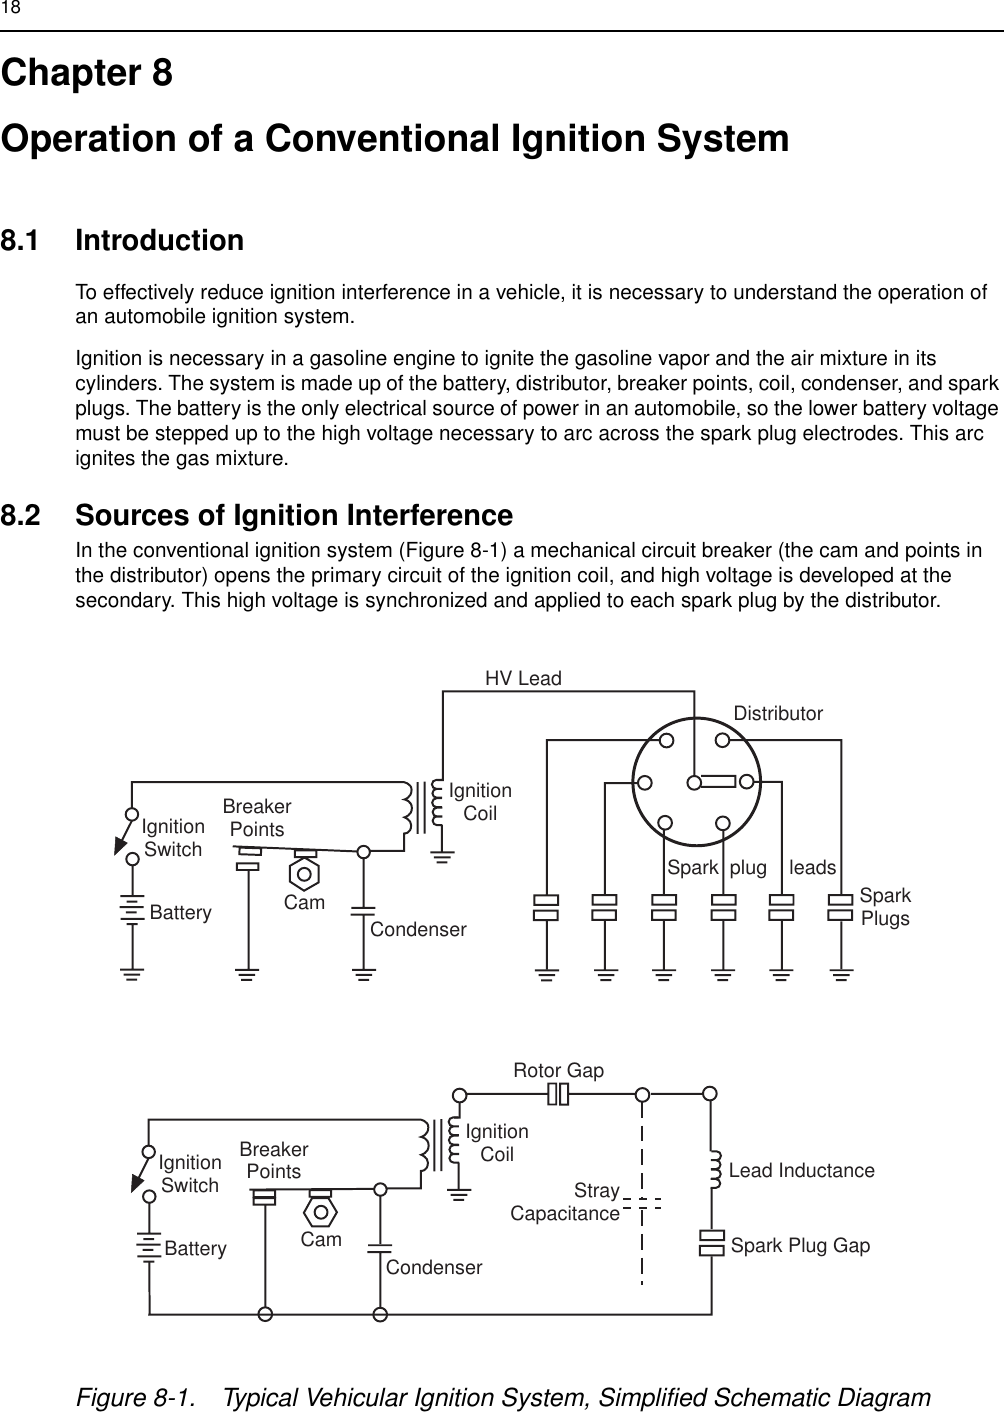 18Chapter 8Operation of a Conventional Ignition System8.1 IntroductionTo effectively reduce ignition interference in a vehicle, it is necessary to understand the operation of an automobile ignition system.Ignition is necessary in a gasoline engine to ignite the gasoline vapor and the air mixture in its cylinders. The system is made up of the battery, distributor, breaker points, coil, condenser, and spark plugs. The battery is the only electrical source of power in an automobile, so the lower battery voltage must be stepped up to the high voltage necessary to arc across the spark plug electrodes. This arc ignites the gas mixture.8.2 Sources of Ignition Interference In the conventional ignition system (Figure 8-1) a mechanical circuit breaker (the cam and points in the distributor) opens the primary circuit of the ignition coil, and high voltage is developed at the secondary. This high voltage is synchronized and applied to each spark plug by the distributor.Figure 8-1. Typical Vehicular Ignition System, Simplified Schematic Diagram HV LeadDistributorSpark  plug    leadsSparkPlugsIgnitionCoilCondenserCamBreakerPointsIgnitionSwitchBatteryIgnitionCoilCondenserStrayCapacitanceCamBreakerPointsIgnitionSwitchBatteryRotor GapLead InductanceSpark Plug GapFL0830261-O